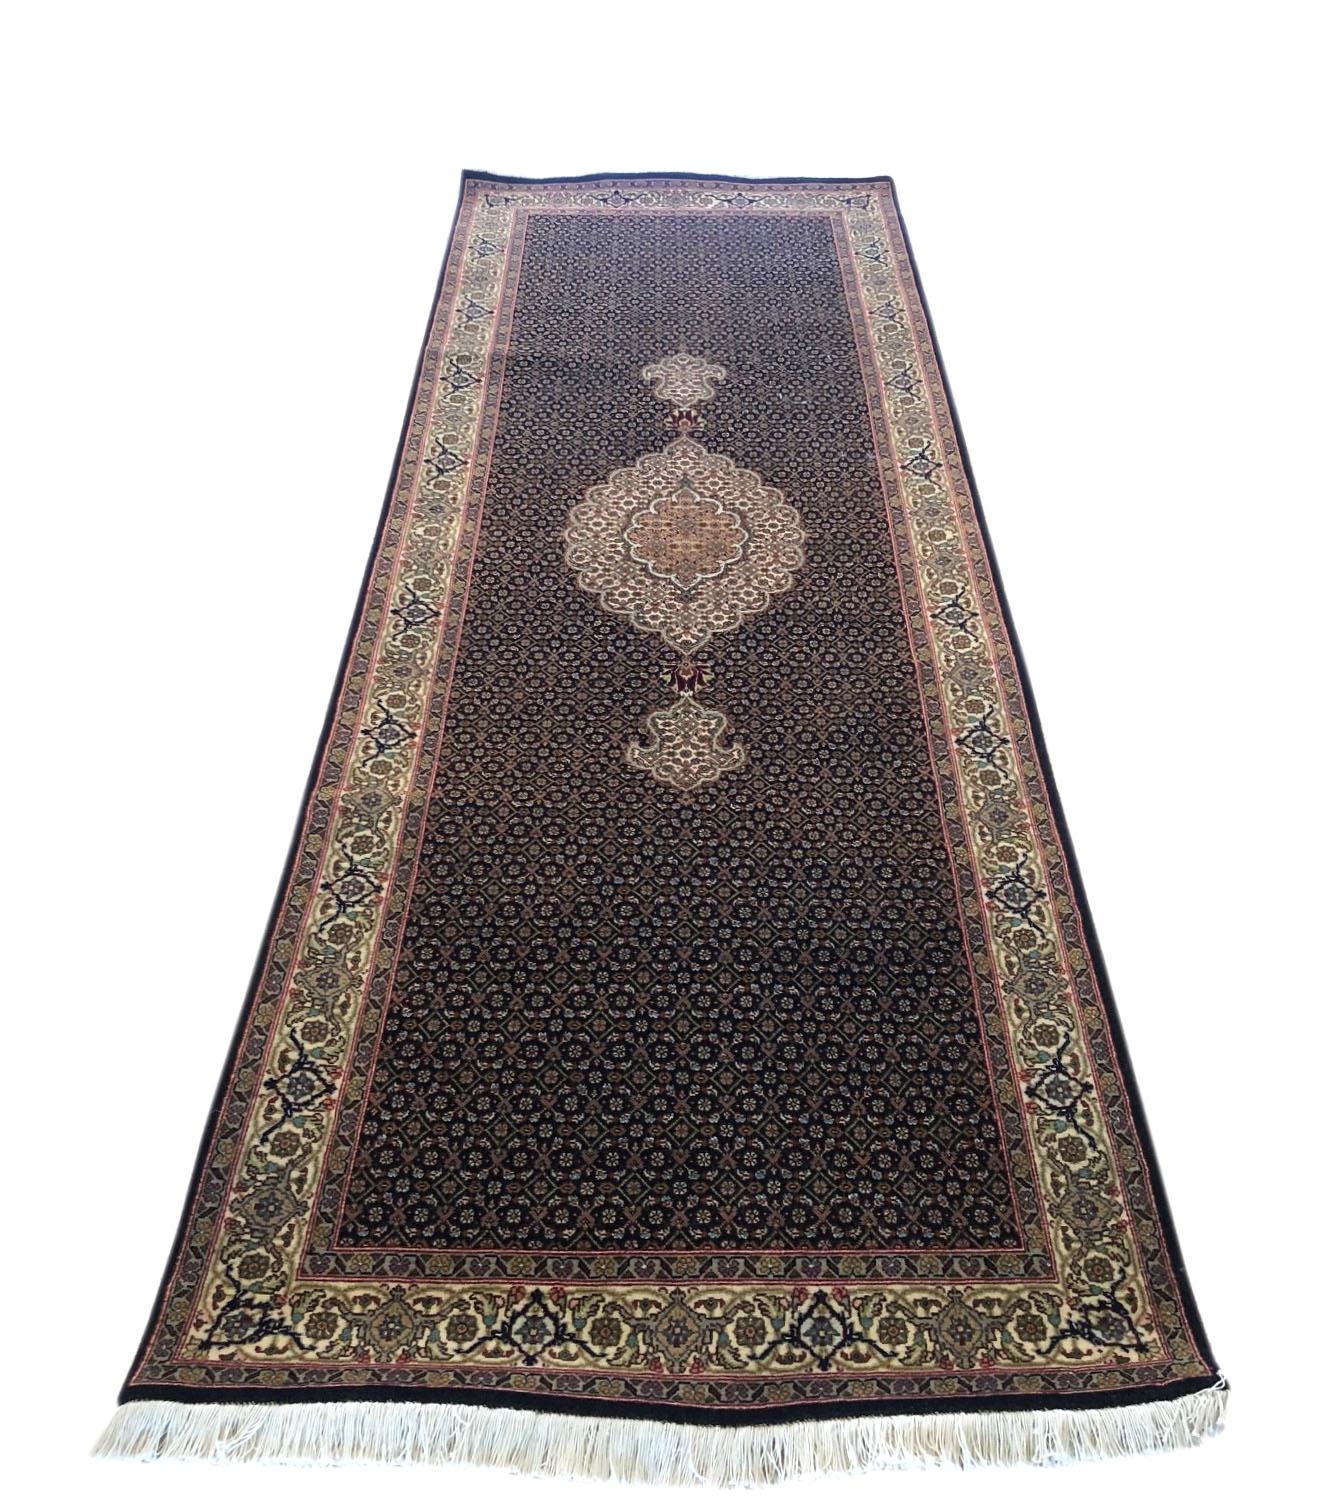 Tabriz rugs are well known for their excellent weaving and design. One of the very famous patterns of Tabriz rugs are Fish design known is Mahi and is one of the classis patterns produced by the masterful carpet in Tabriz. This beautiful piece has